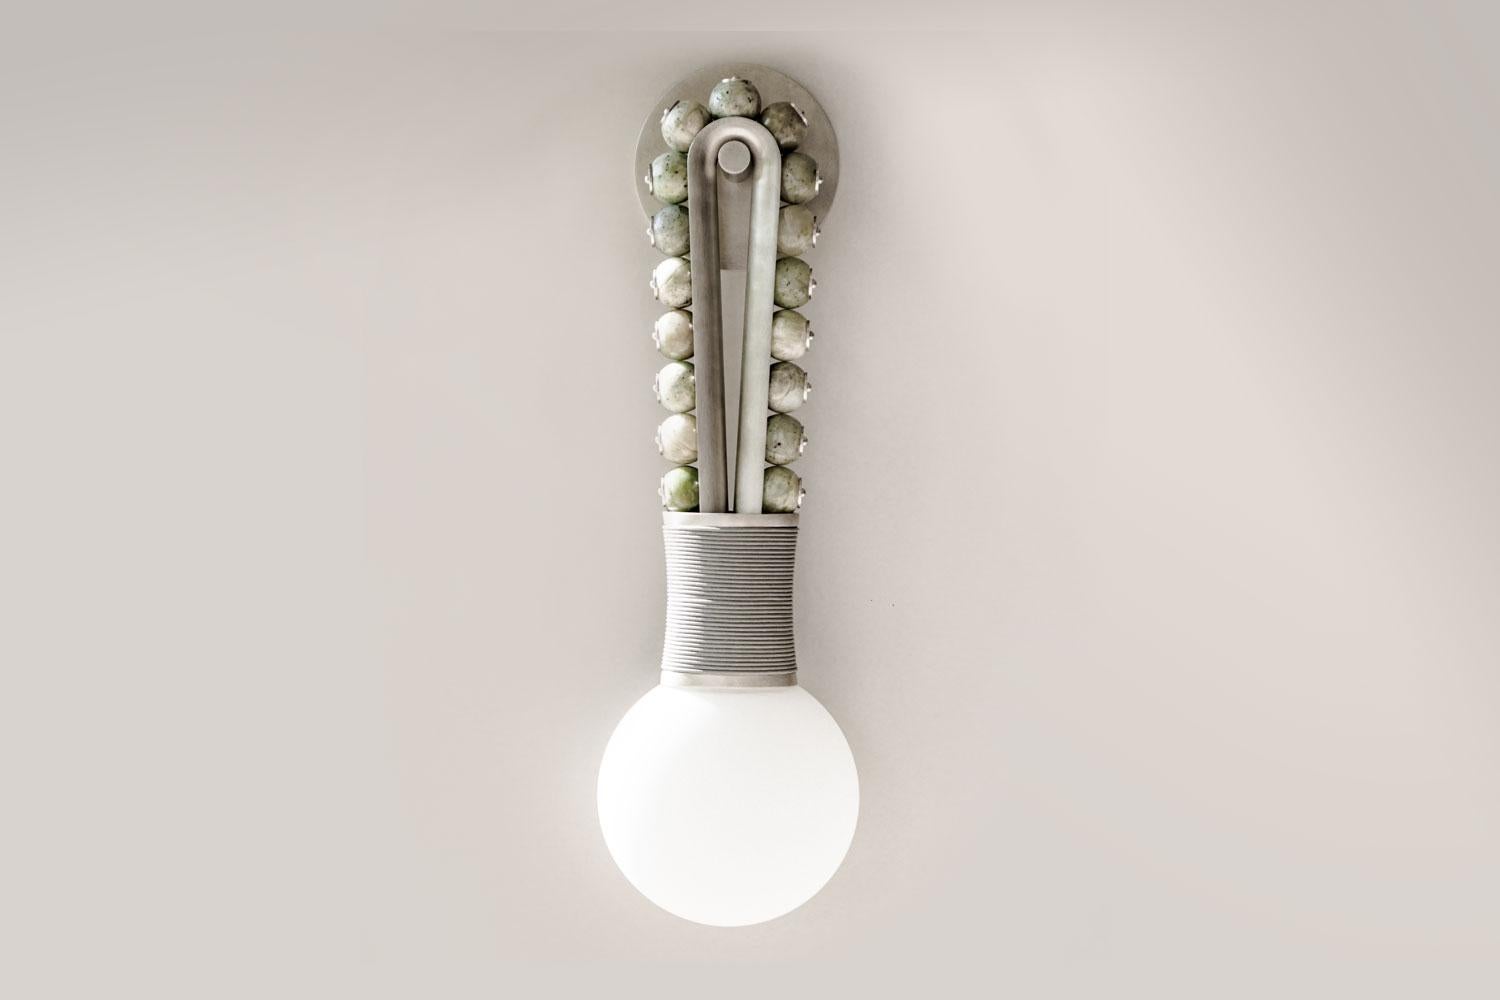 Talisman loop scone by Apparatus

Semi-precious Jade stones are pierced by finely fluted pins, affixing them to a gray leather-bound tarnished silver structure. This sconce design recalls fine details found on statues at the ancient city of